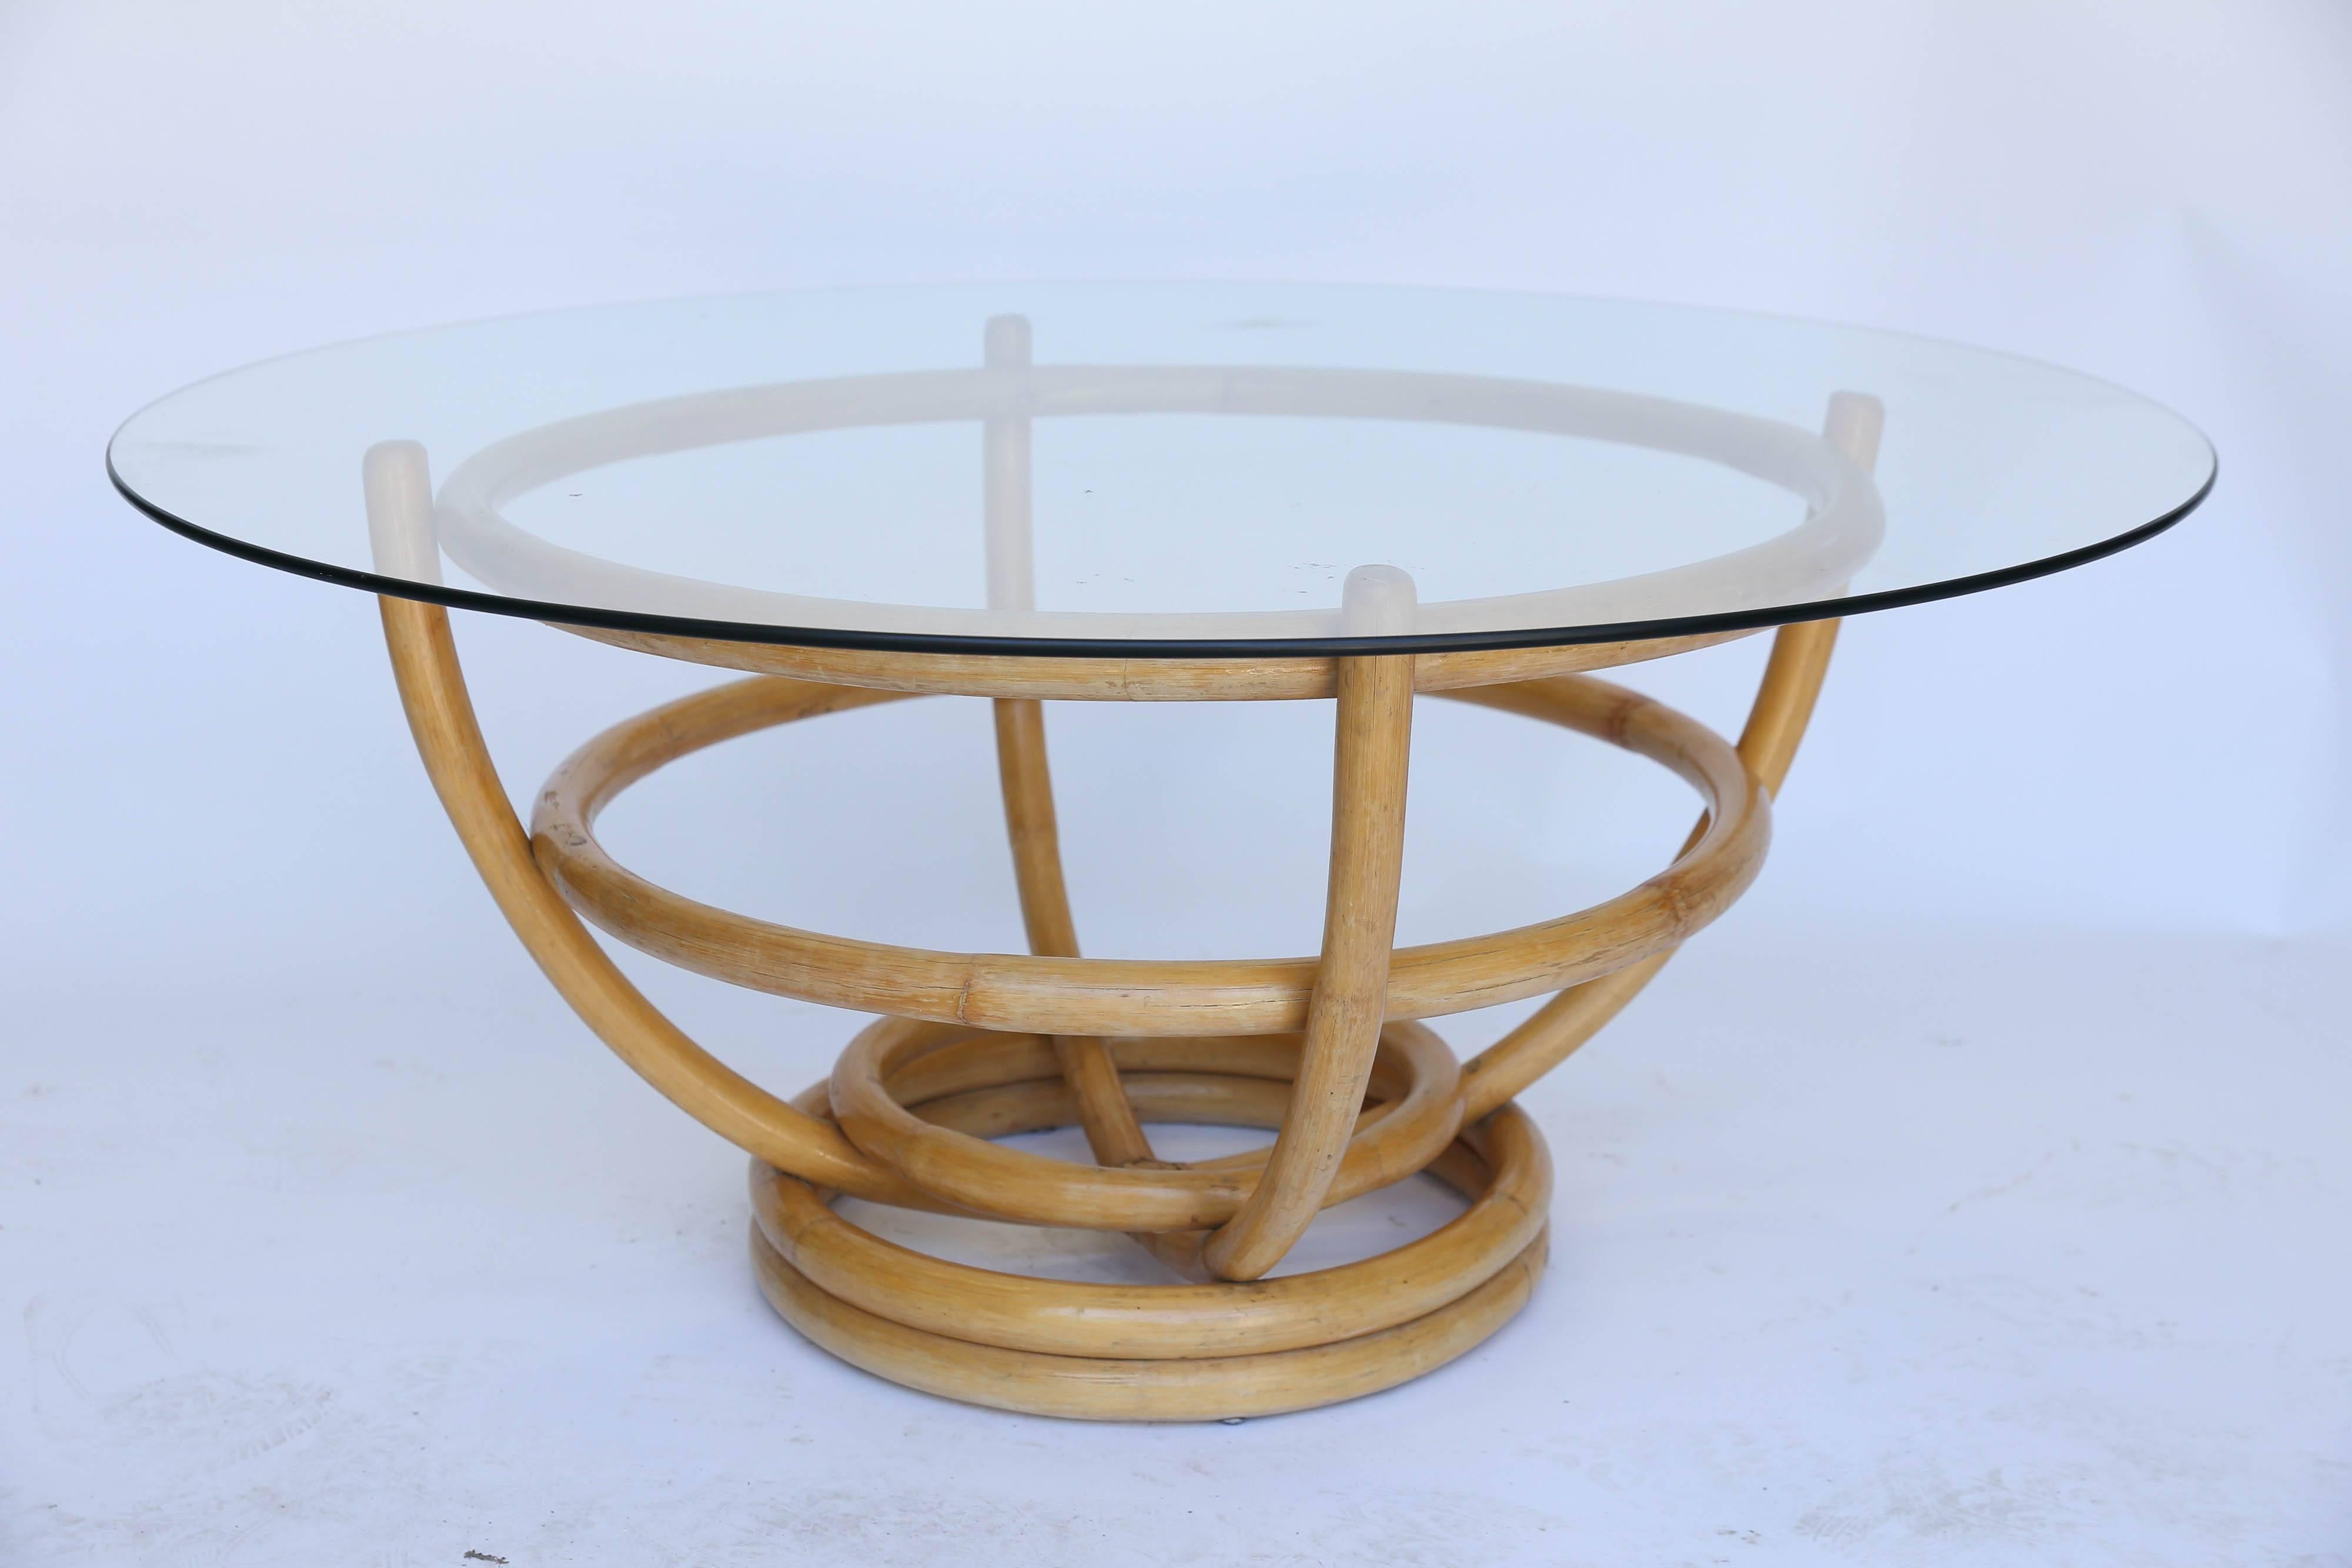 In nearly perfect condition, a round midcentury bamboo coffee table with glass top. With no splits or tears in the bamboo wrapping, this is retro cool at it's best.